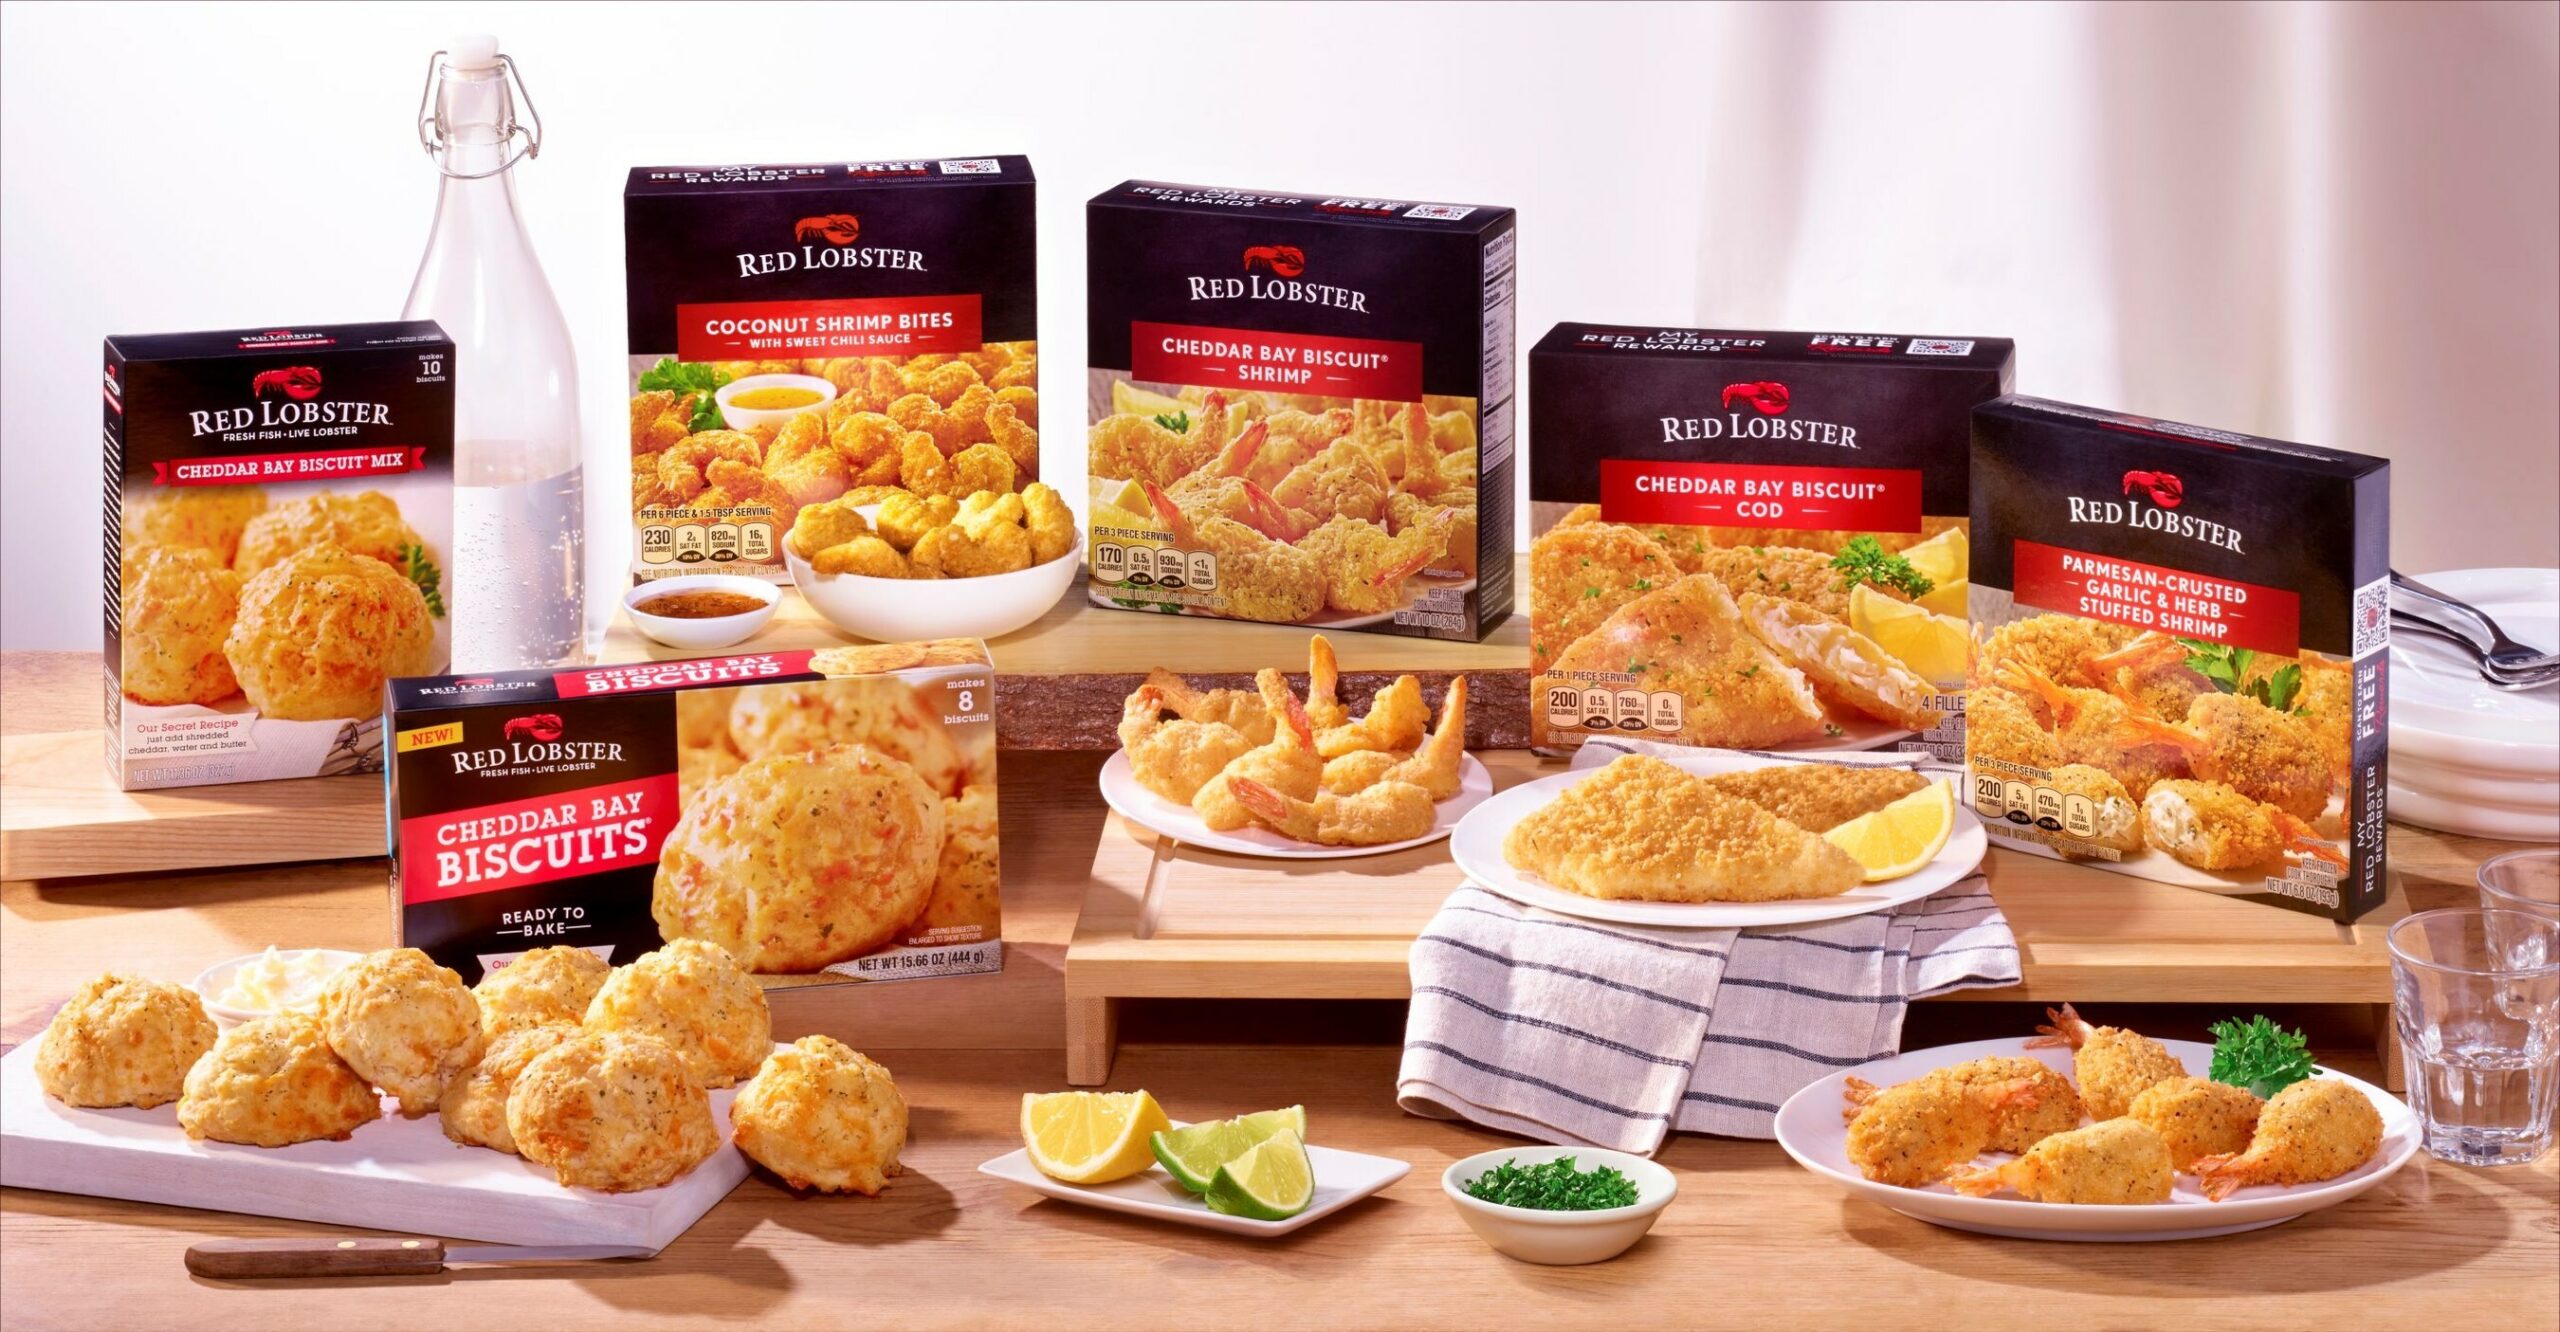 Red Lobster® Launches First-Ever Frozen Seafood Product Line Featuring Cheddar Bay Biscuit® Shrimp, Coconut Shrimp Bites, and More